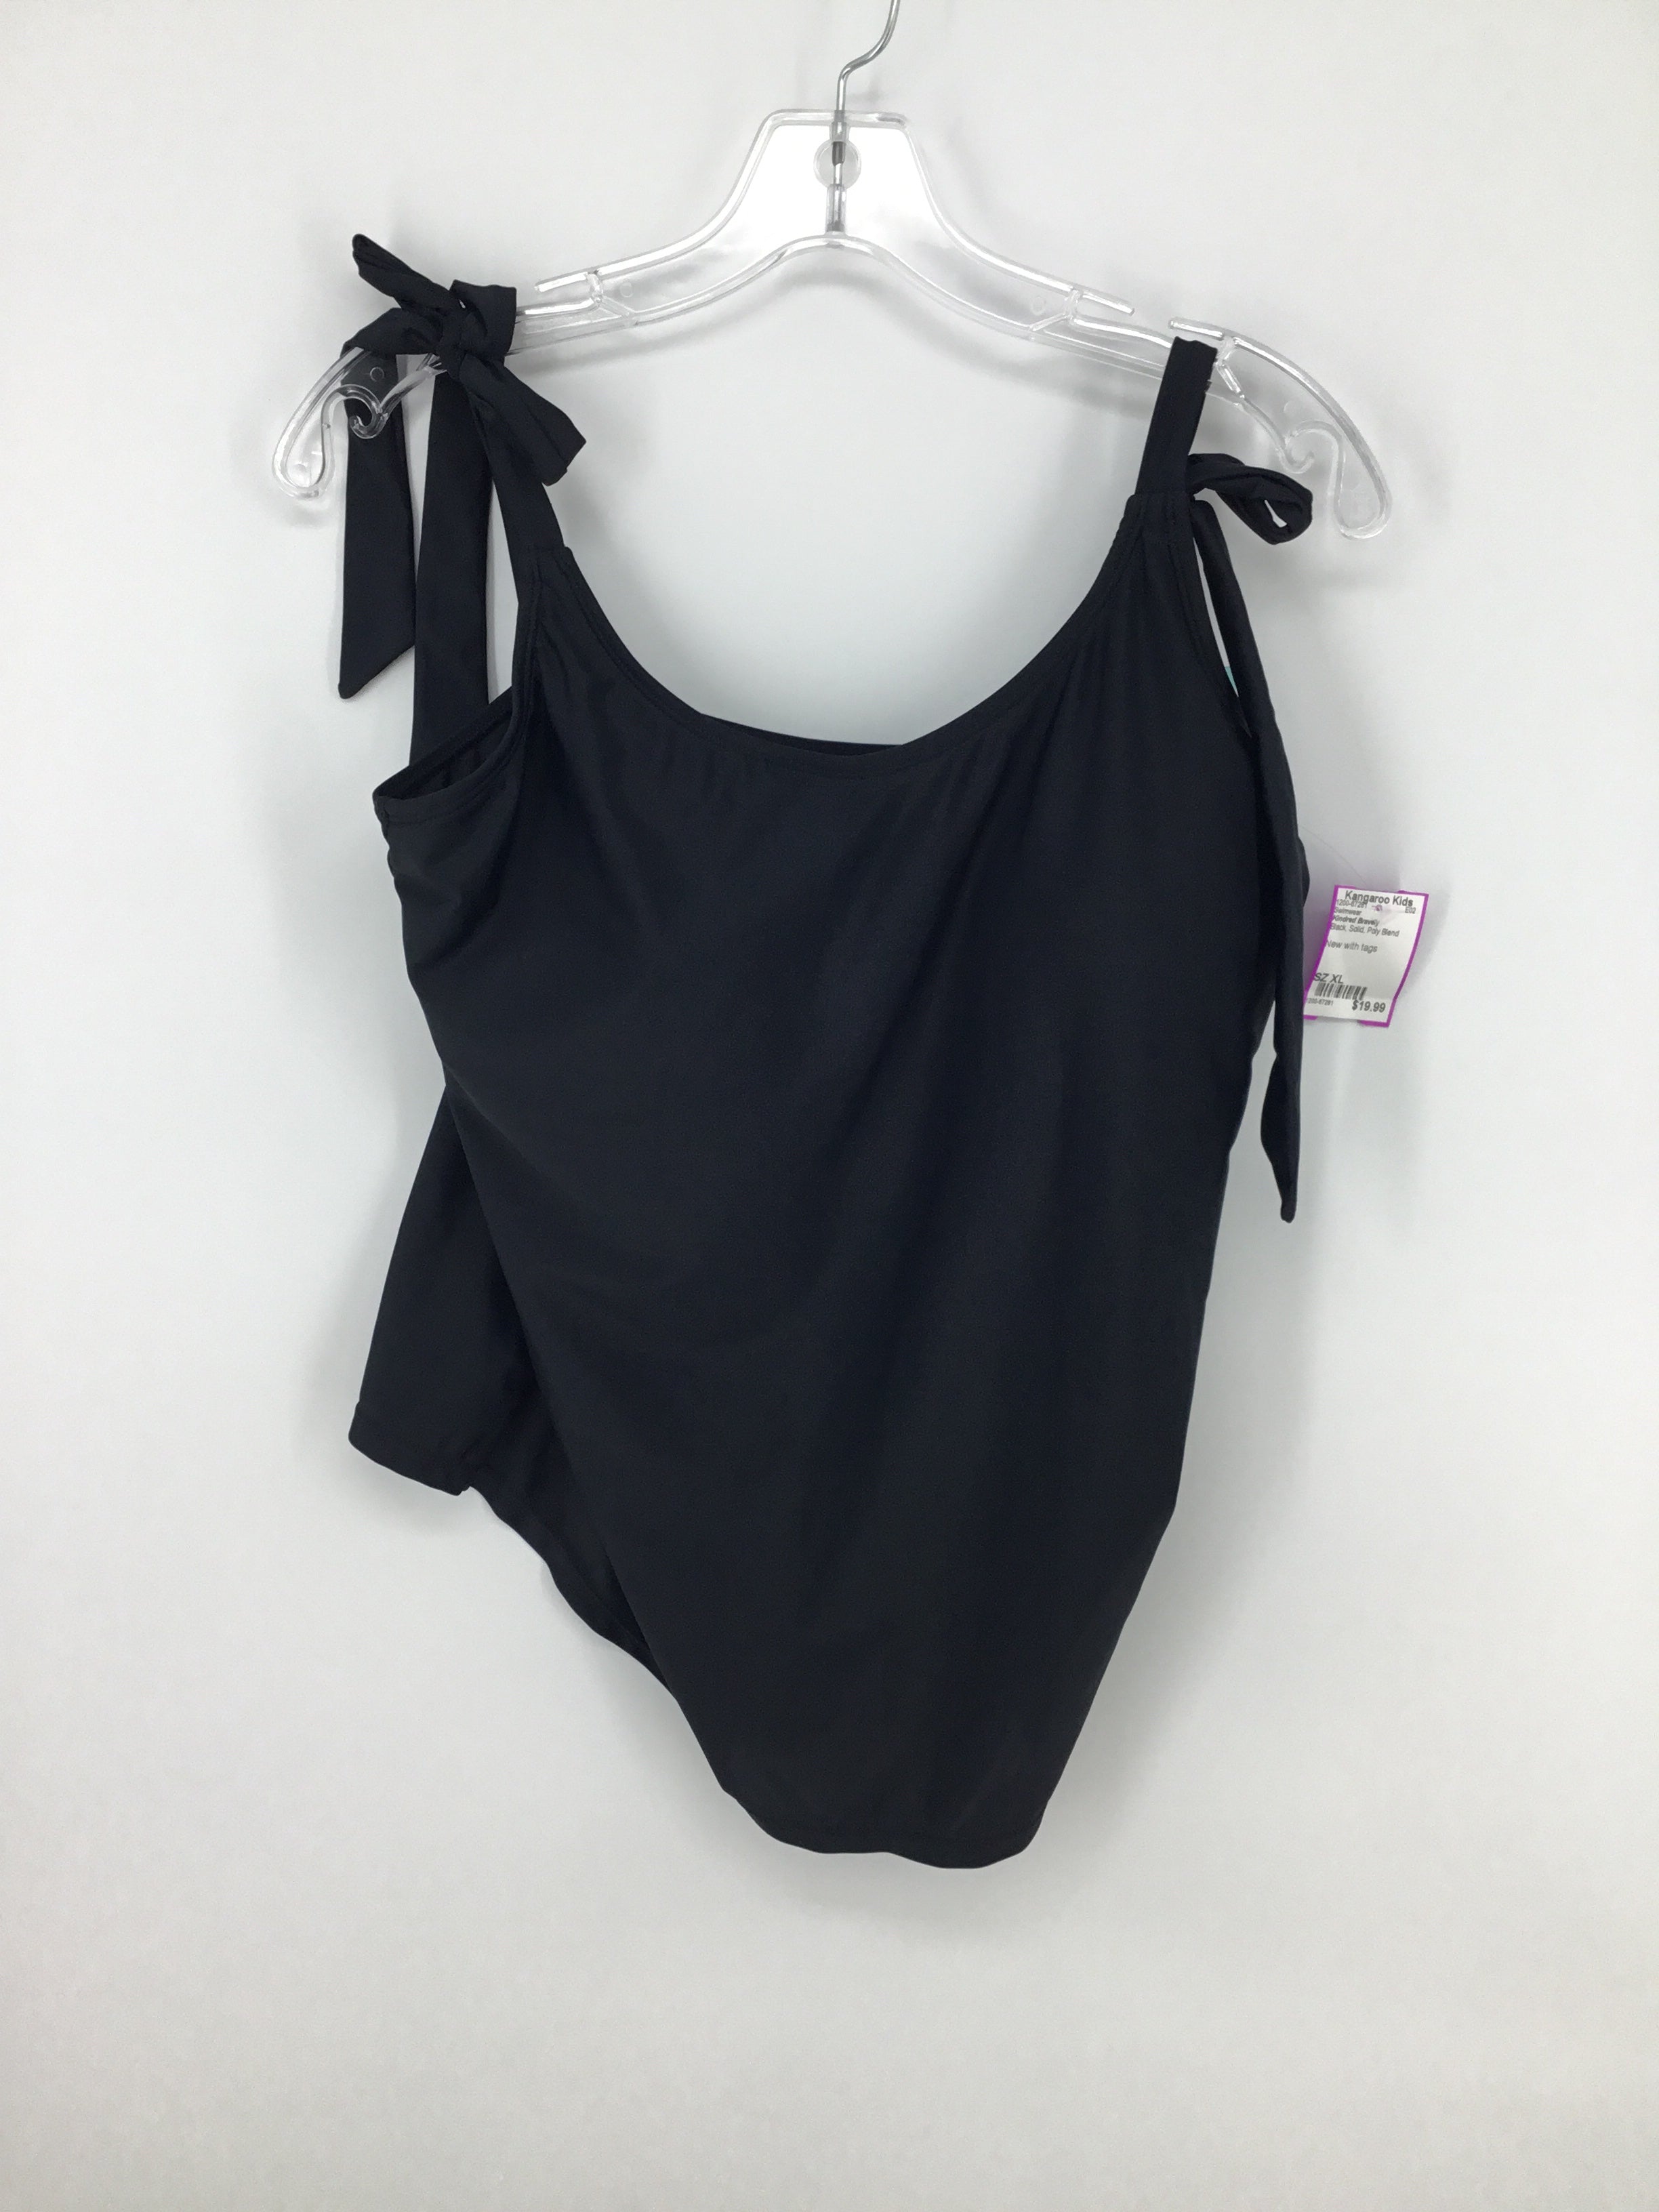 Kindred Bravely Size XL Poly Blend Swimwear